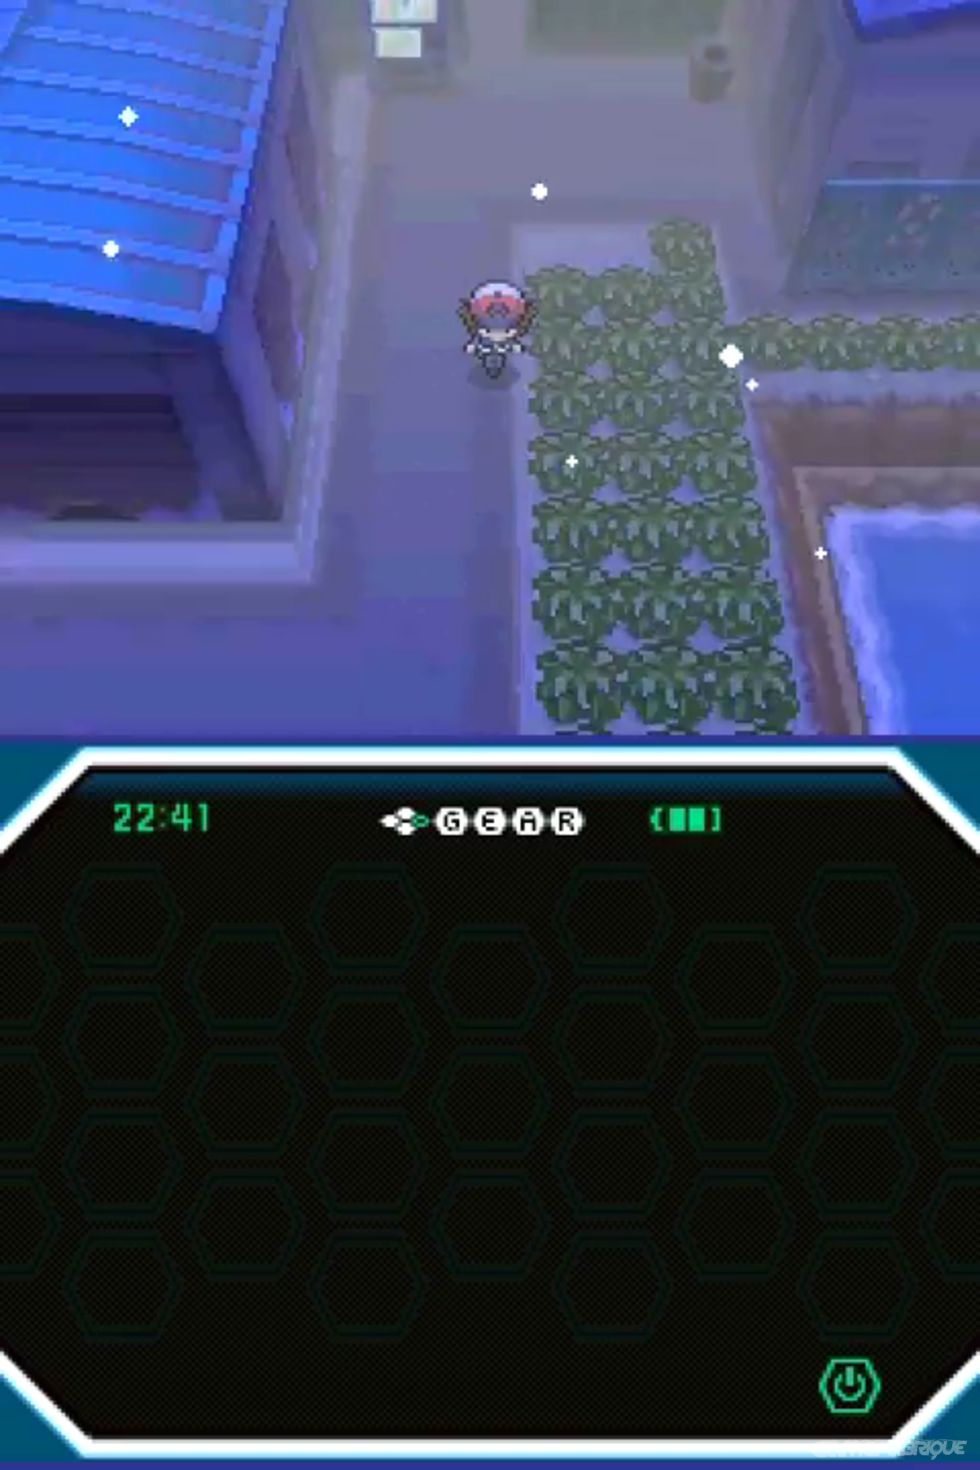 Pokemon Black Version - ds - Walkthrough and Guide - Page 508 - GameSpy